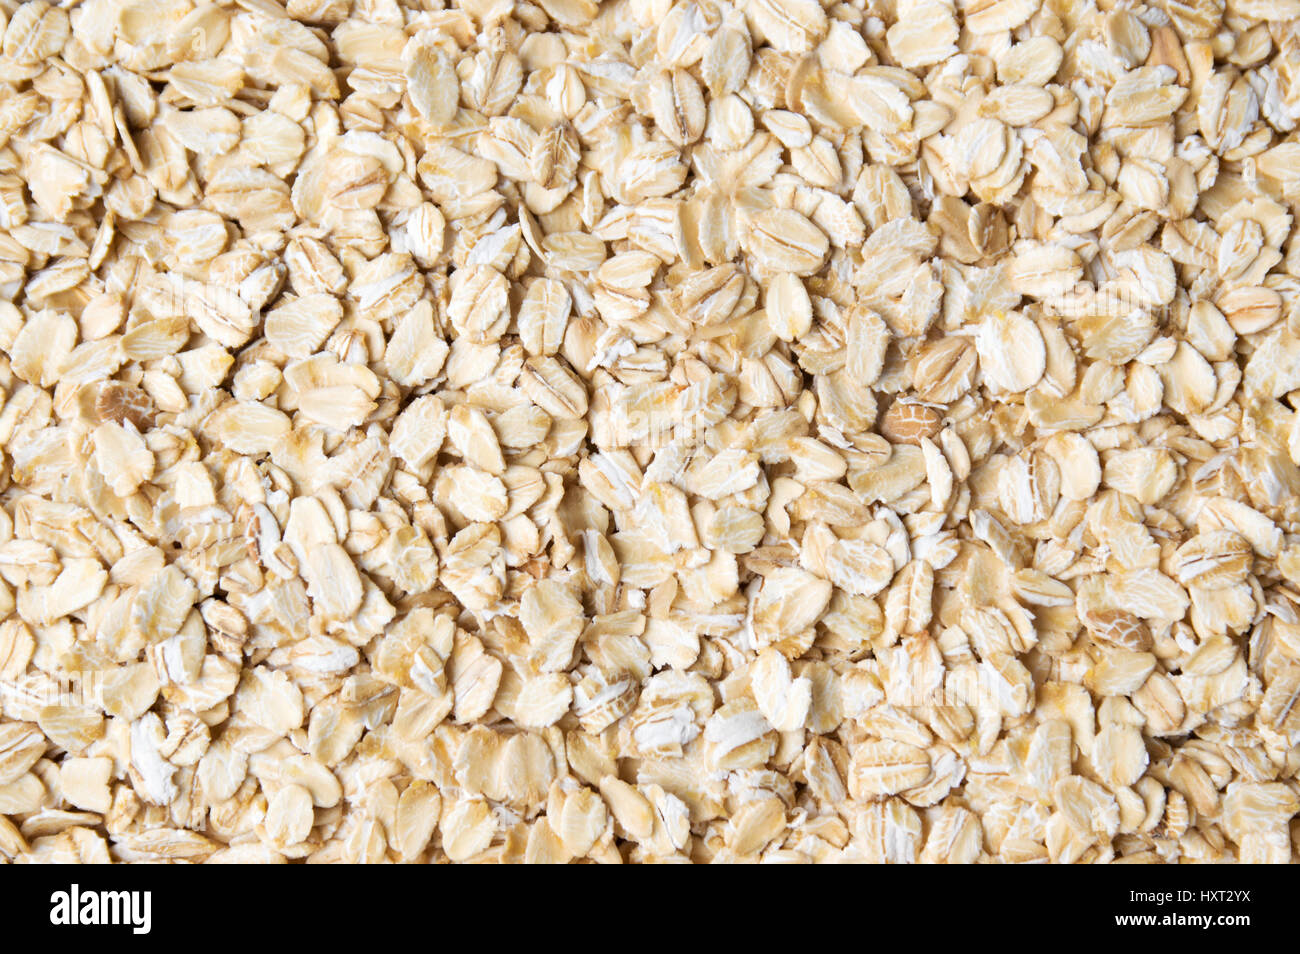 Bunch of oat flakes forming a background pattern Stock Photo